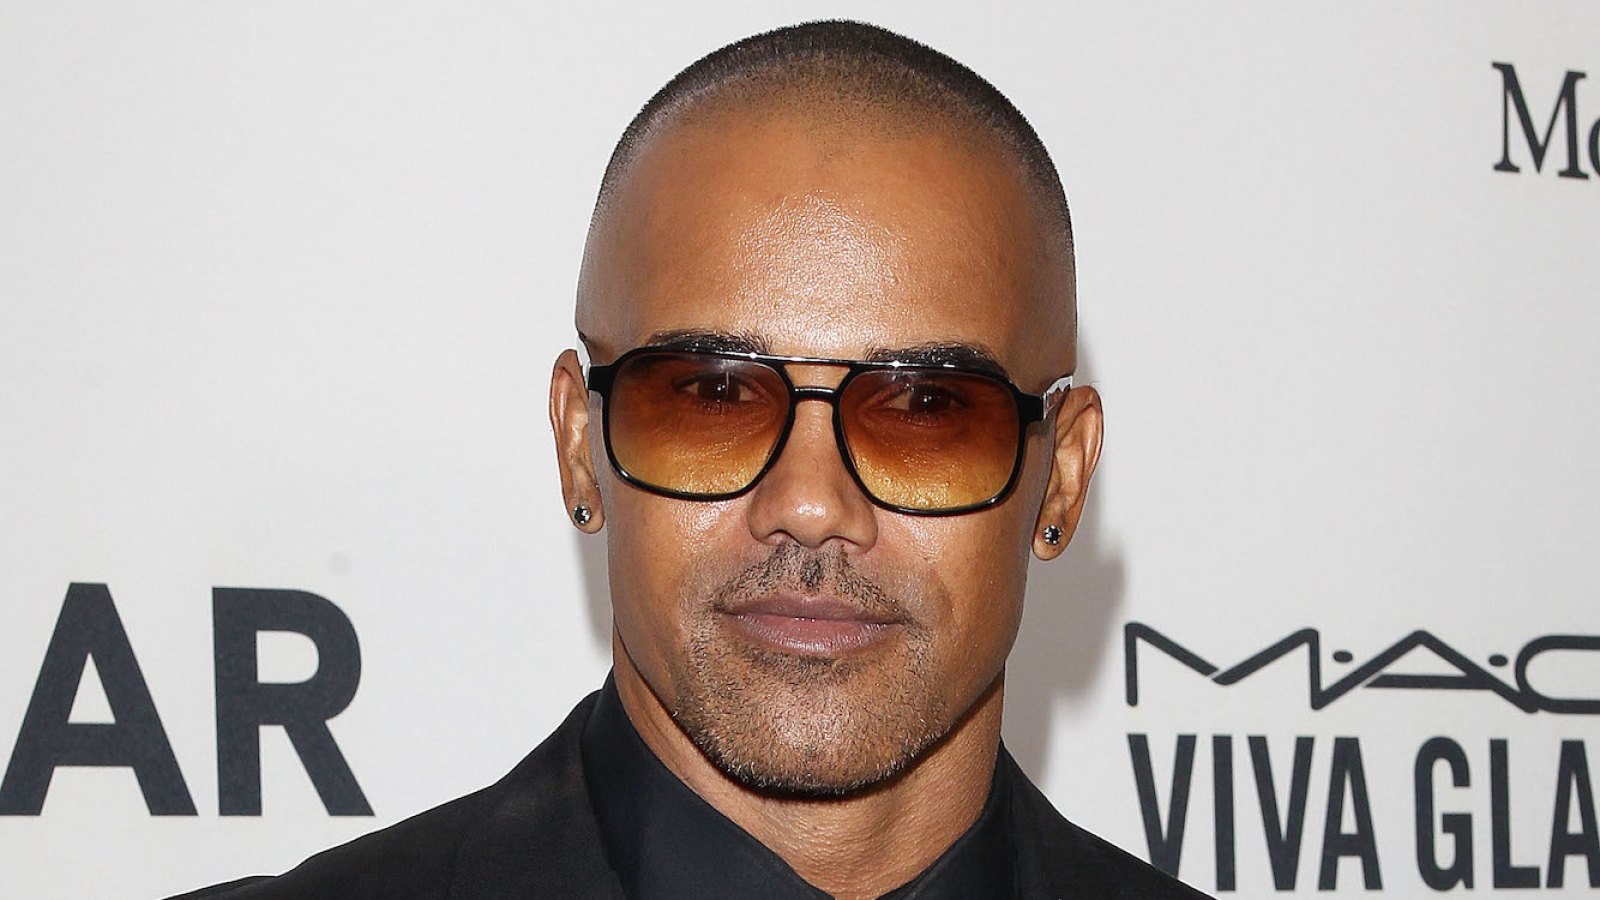 Shemar Moore Announces He Is Expecting His 1st Child With His Girlfriend